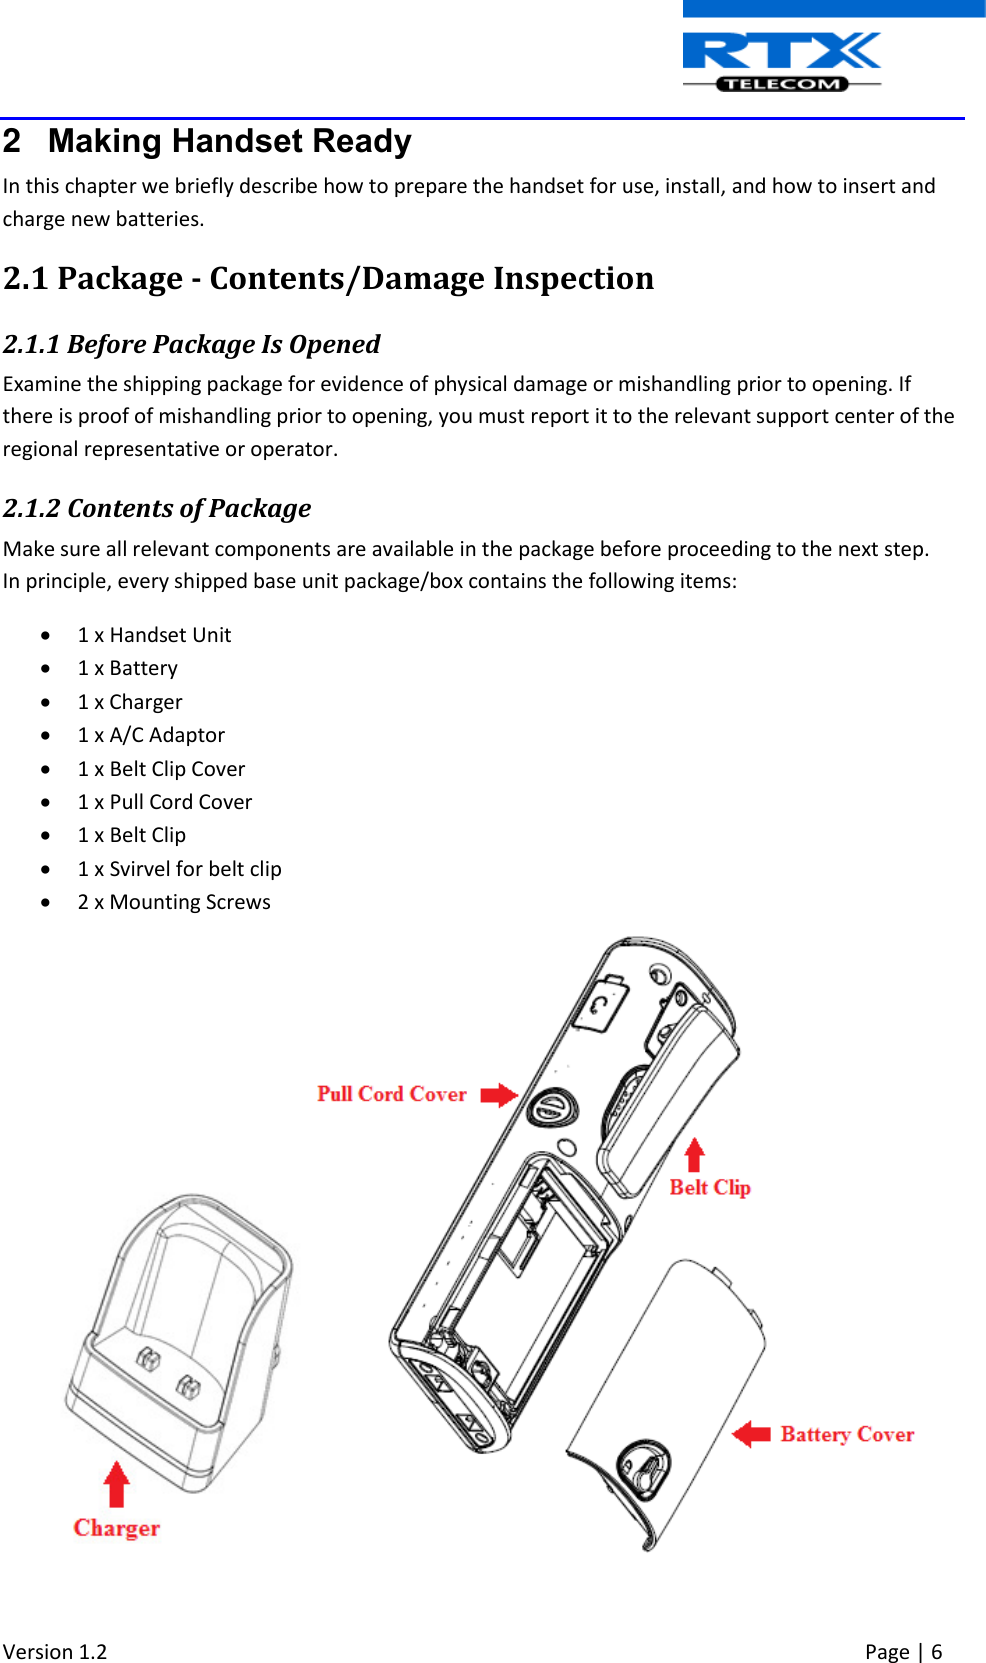  Version 1.2     Page | 6   2  Making Handset Ready In this chapter we briefly describe how to prepare the handset for use, install, and how to insert and charge new batteries.  2.1 Package - Contents/Damage Inspection 2.1.1 Before Package Is Opened Examine the shipping package for evidence of physical damage or mishandling prior to opening. If there is proof of mishandling prior to opening, you must report it to the relevant support center of the regional representative or operator. 2.1.2 Contents of Package Make sure all relevant components are available in the package before proceeding to the next step. In principle, every shipped base unit package/box contains the following items:   1 x Handset Unit  1 x Battery   1 x Charger  1 x A/C Adaptor   1 x Belt Clip Cover  1 x Pull Cord Cover  1 x Belt Clip  1 x Svirvel for belt clip  2 x Mounting Screws    